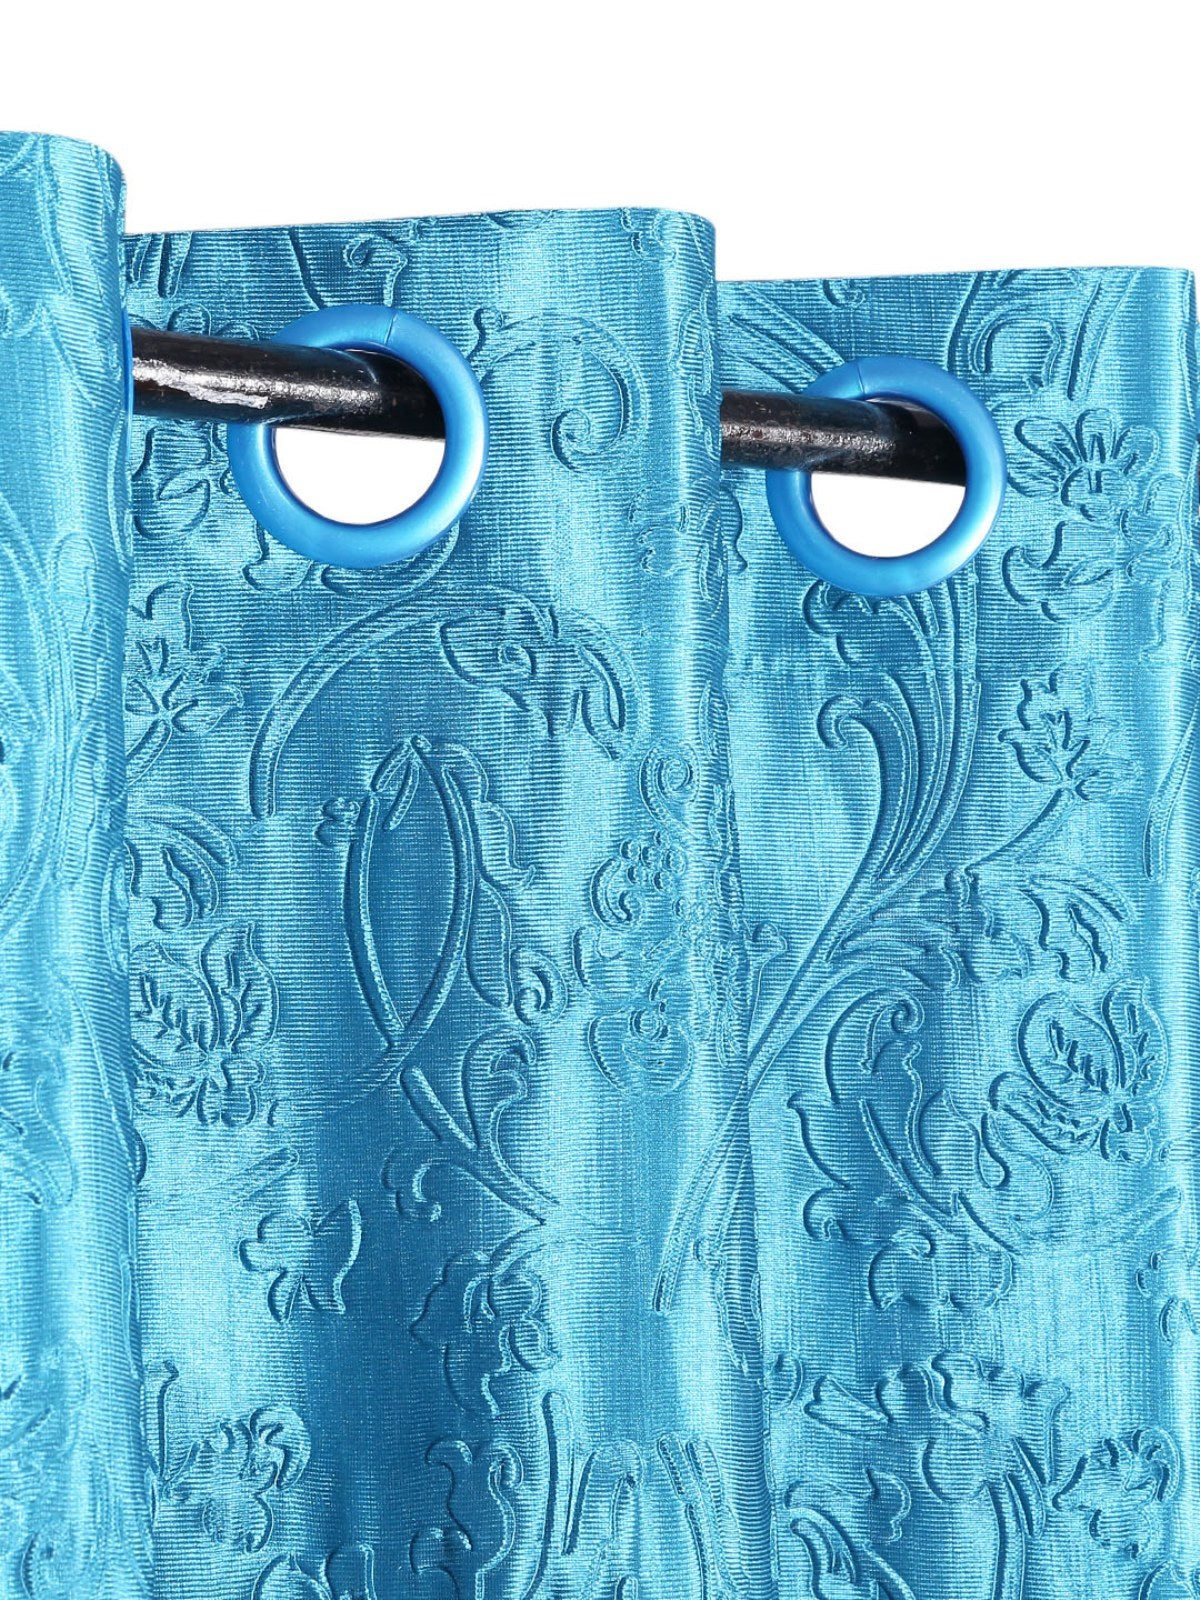 Romee Turquoise Blue Floral Patterned Set of 1 Window Curtains